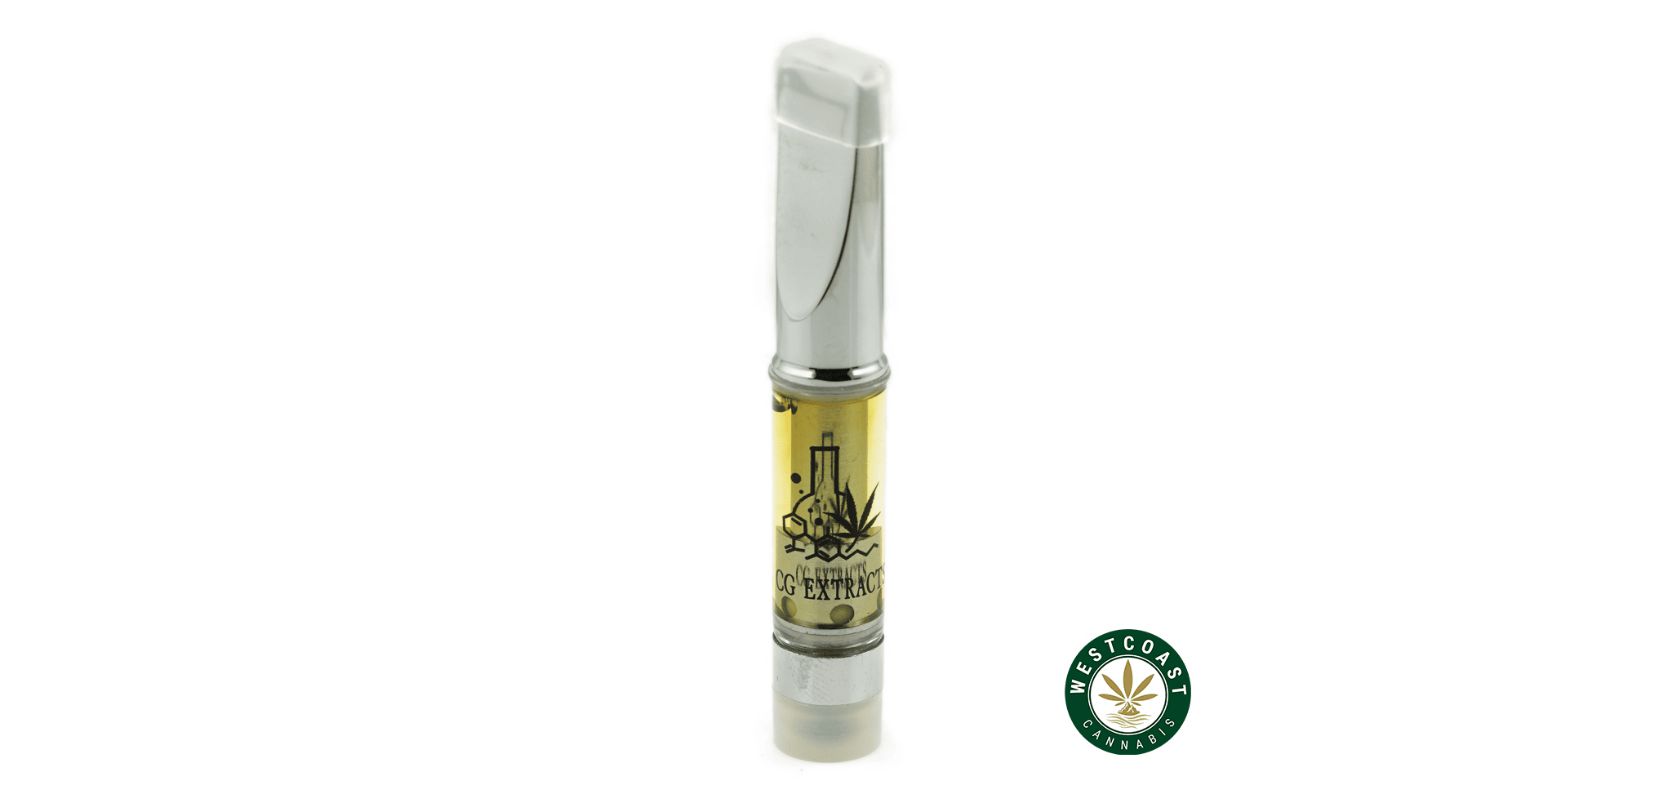 Medical marijuana patients may use the CG Extracts Lemon Skunk Cart to help manage depression or stress. 